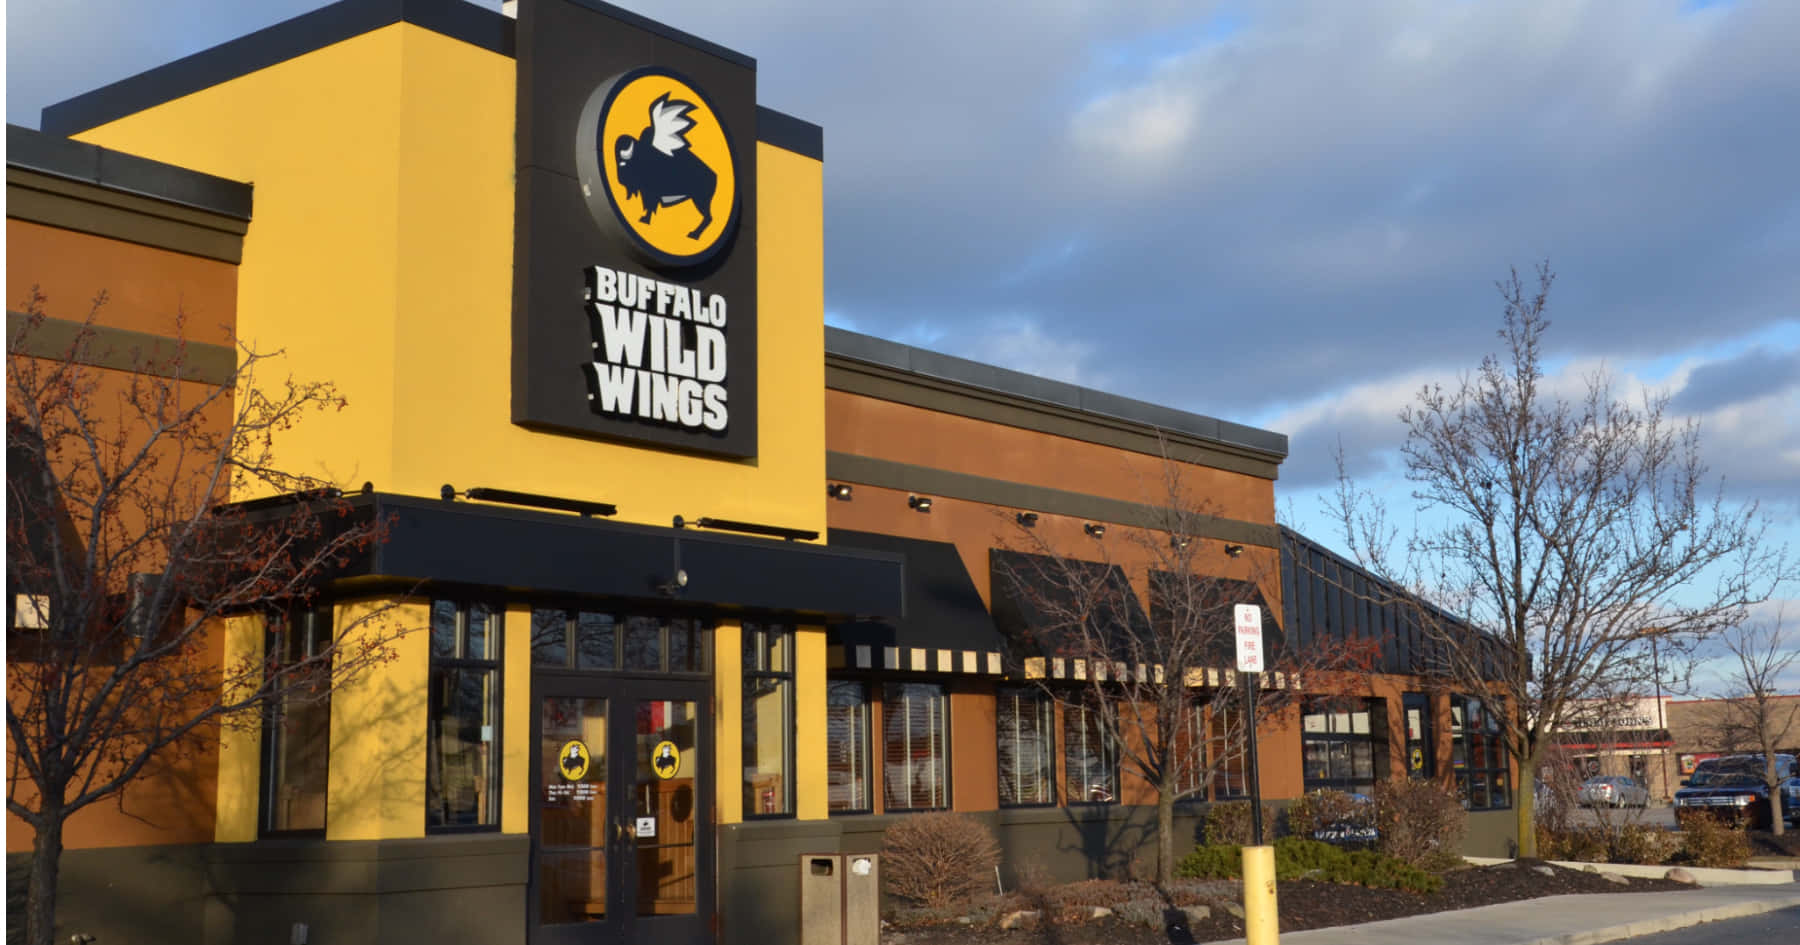 "Treat yourself to some delicious Buffalo Wild Wings!"